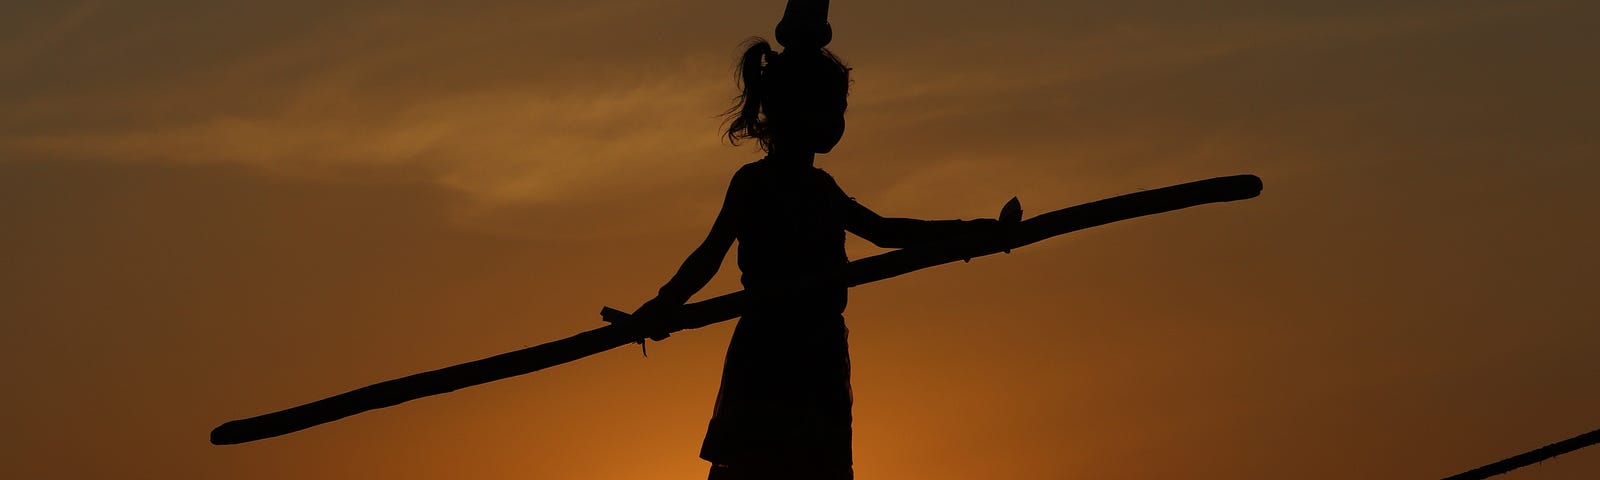 The Baunsa Rani which means “The Bamboo Queen” is an old Indian art form in which young girls walk on tightropes barefoot. The also often perform various acrobatic postures on the rope. This dance form is very dangerous and requires many years of experience. Understanding comes with balance.